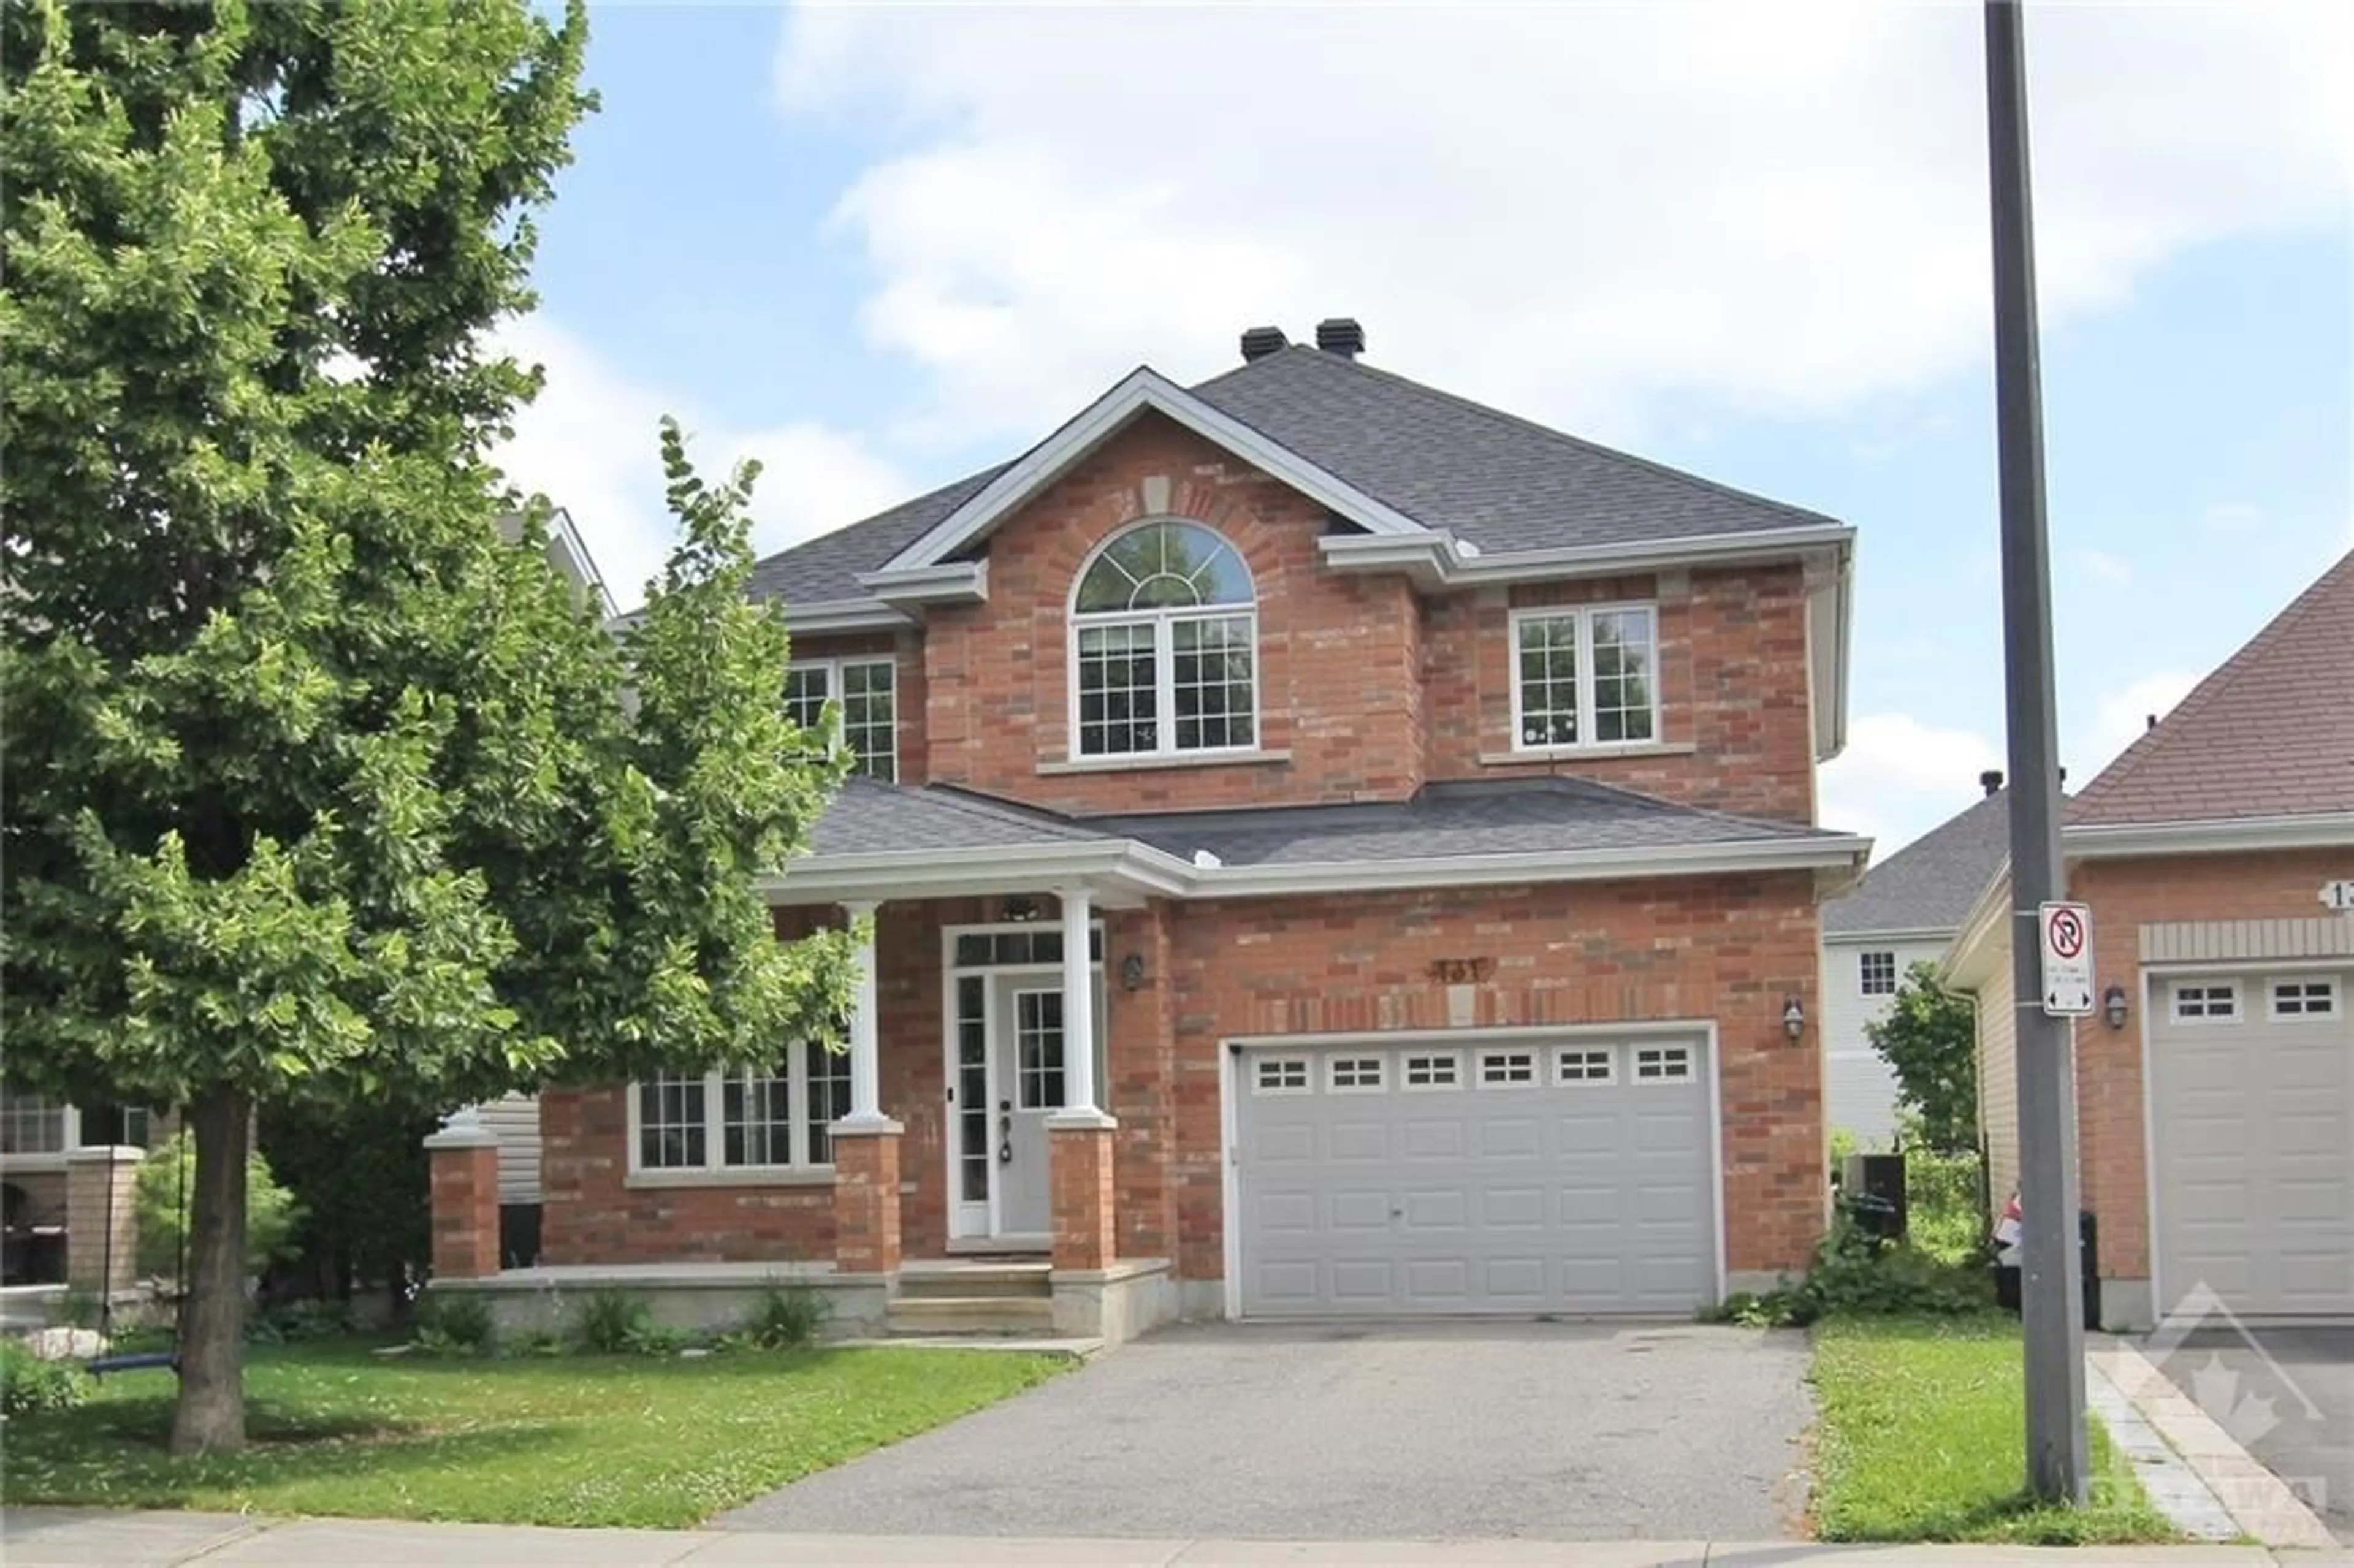 Home with brick exterior material for 131 STEDMAN St, Ottawa Ontario K1T 0B4